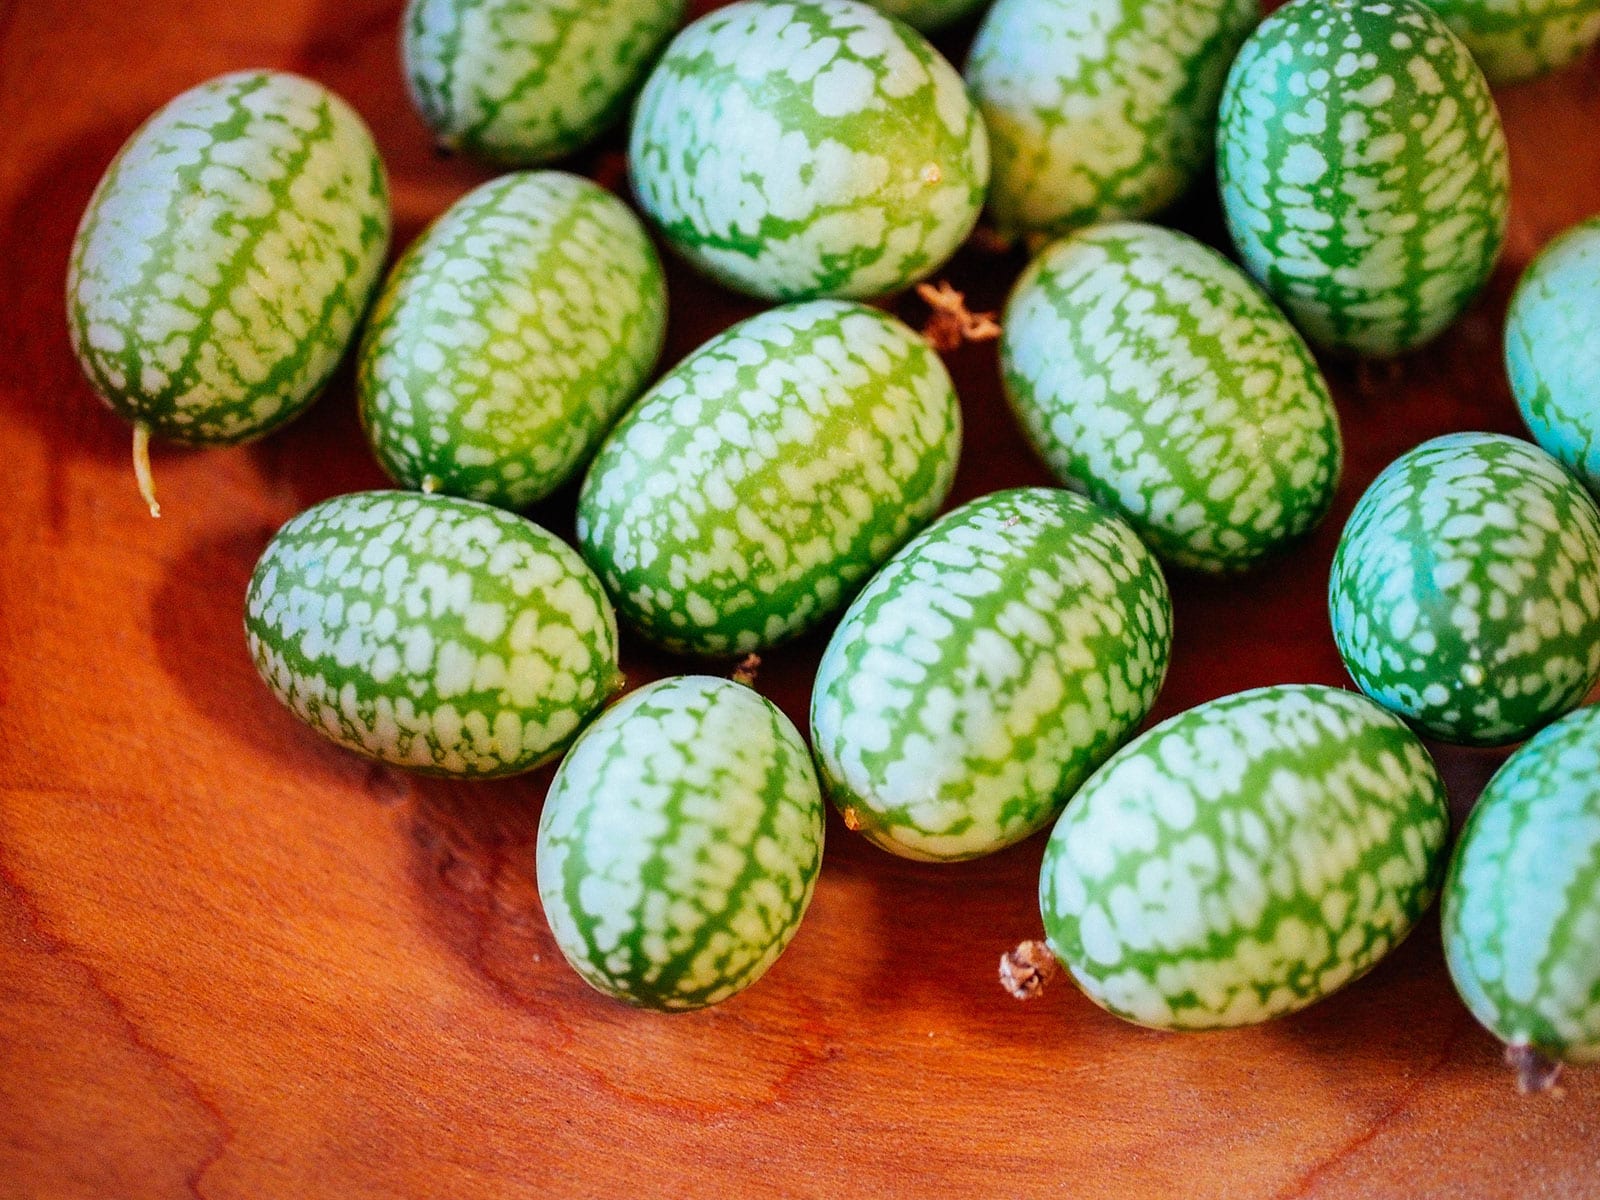 Close-up of green and white "rind" pattern (striations) on cucamelon fruits